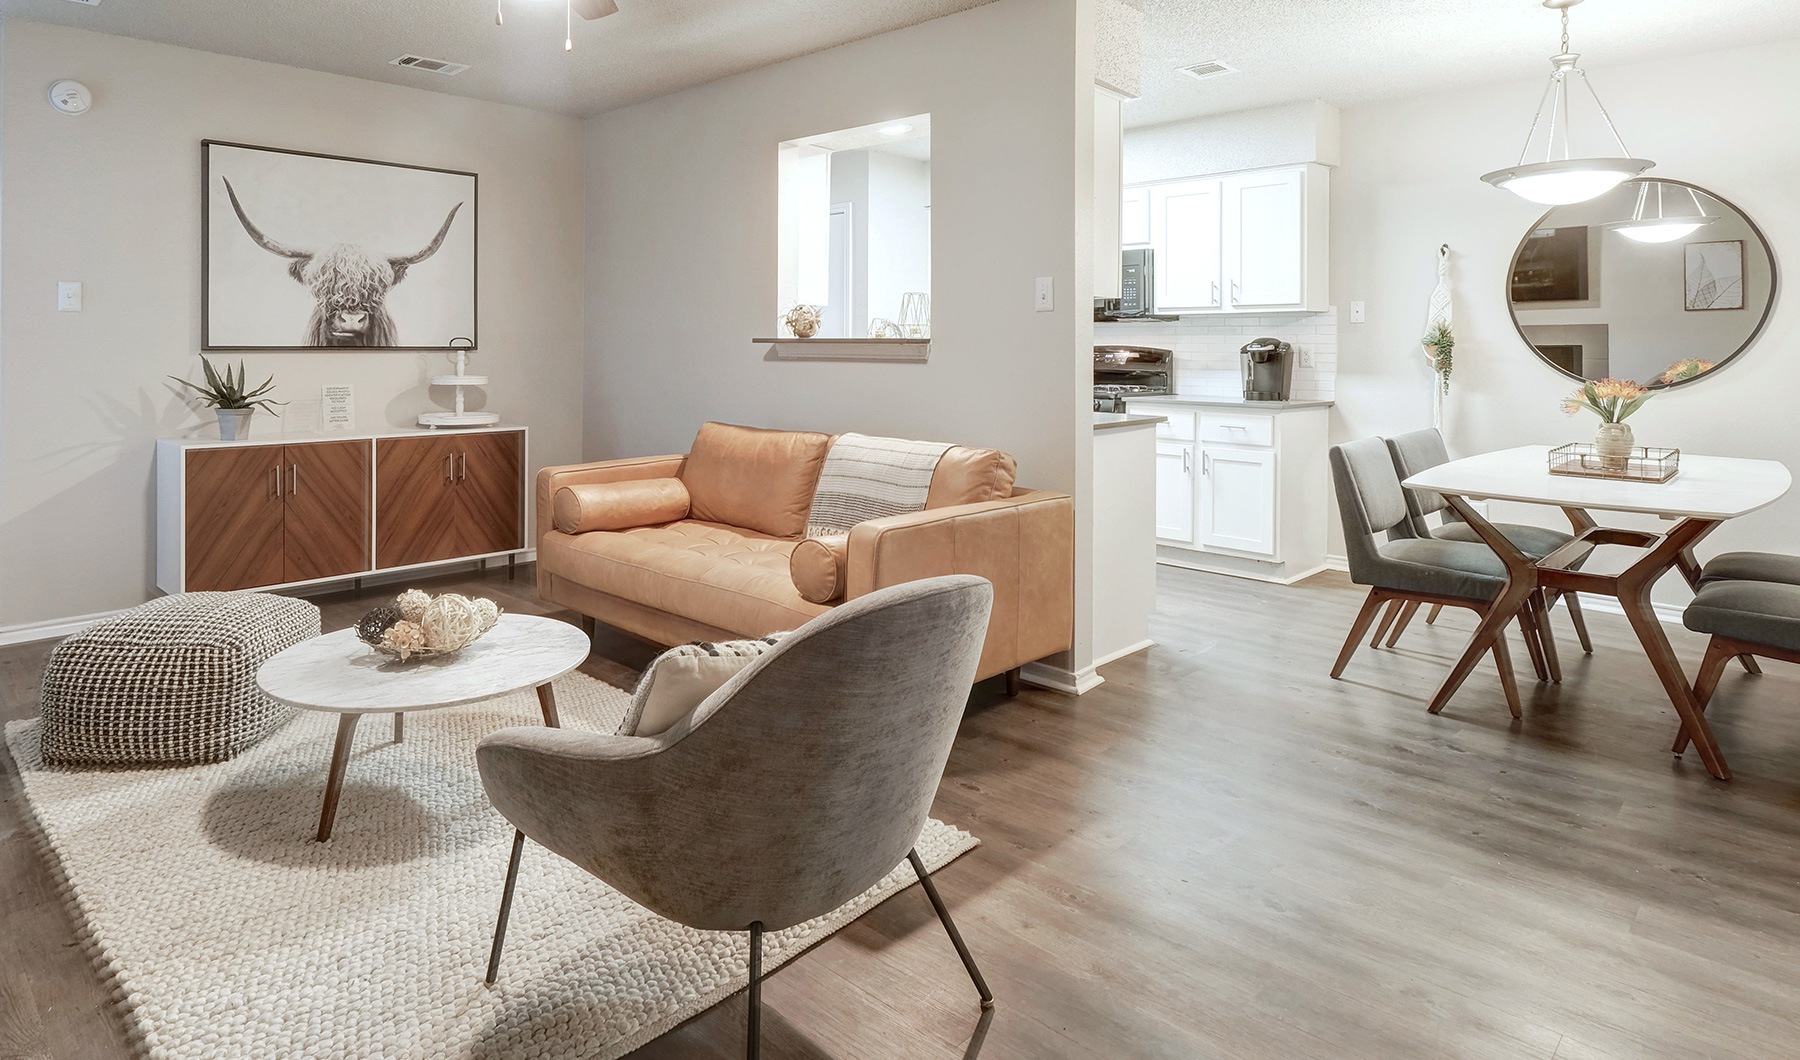 living room with spacious areas, ample space for seating and easy connection to kitchen and dining areas